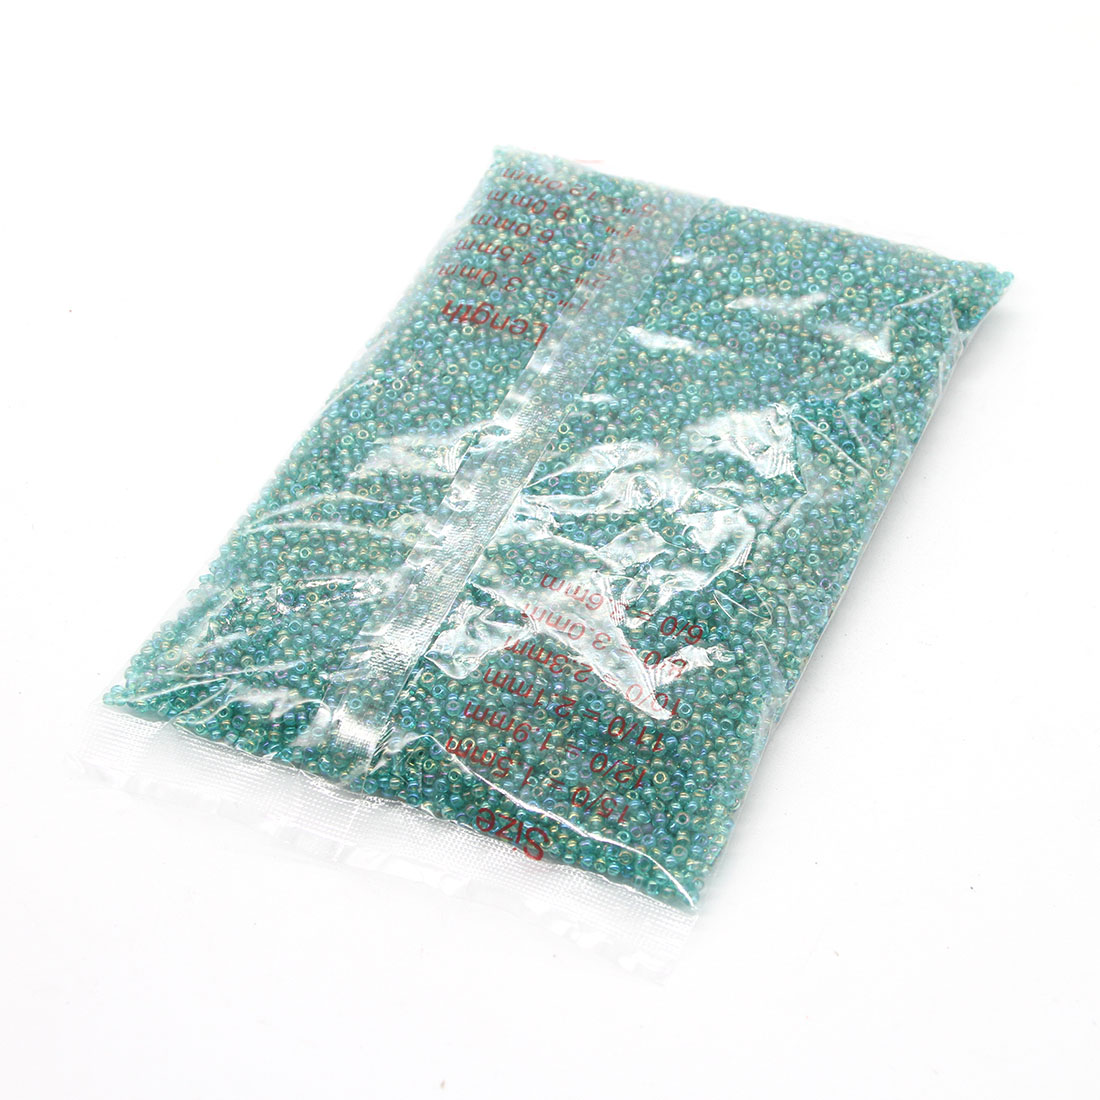 Turquoise 2mm pack of 30,000